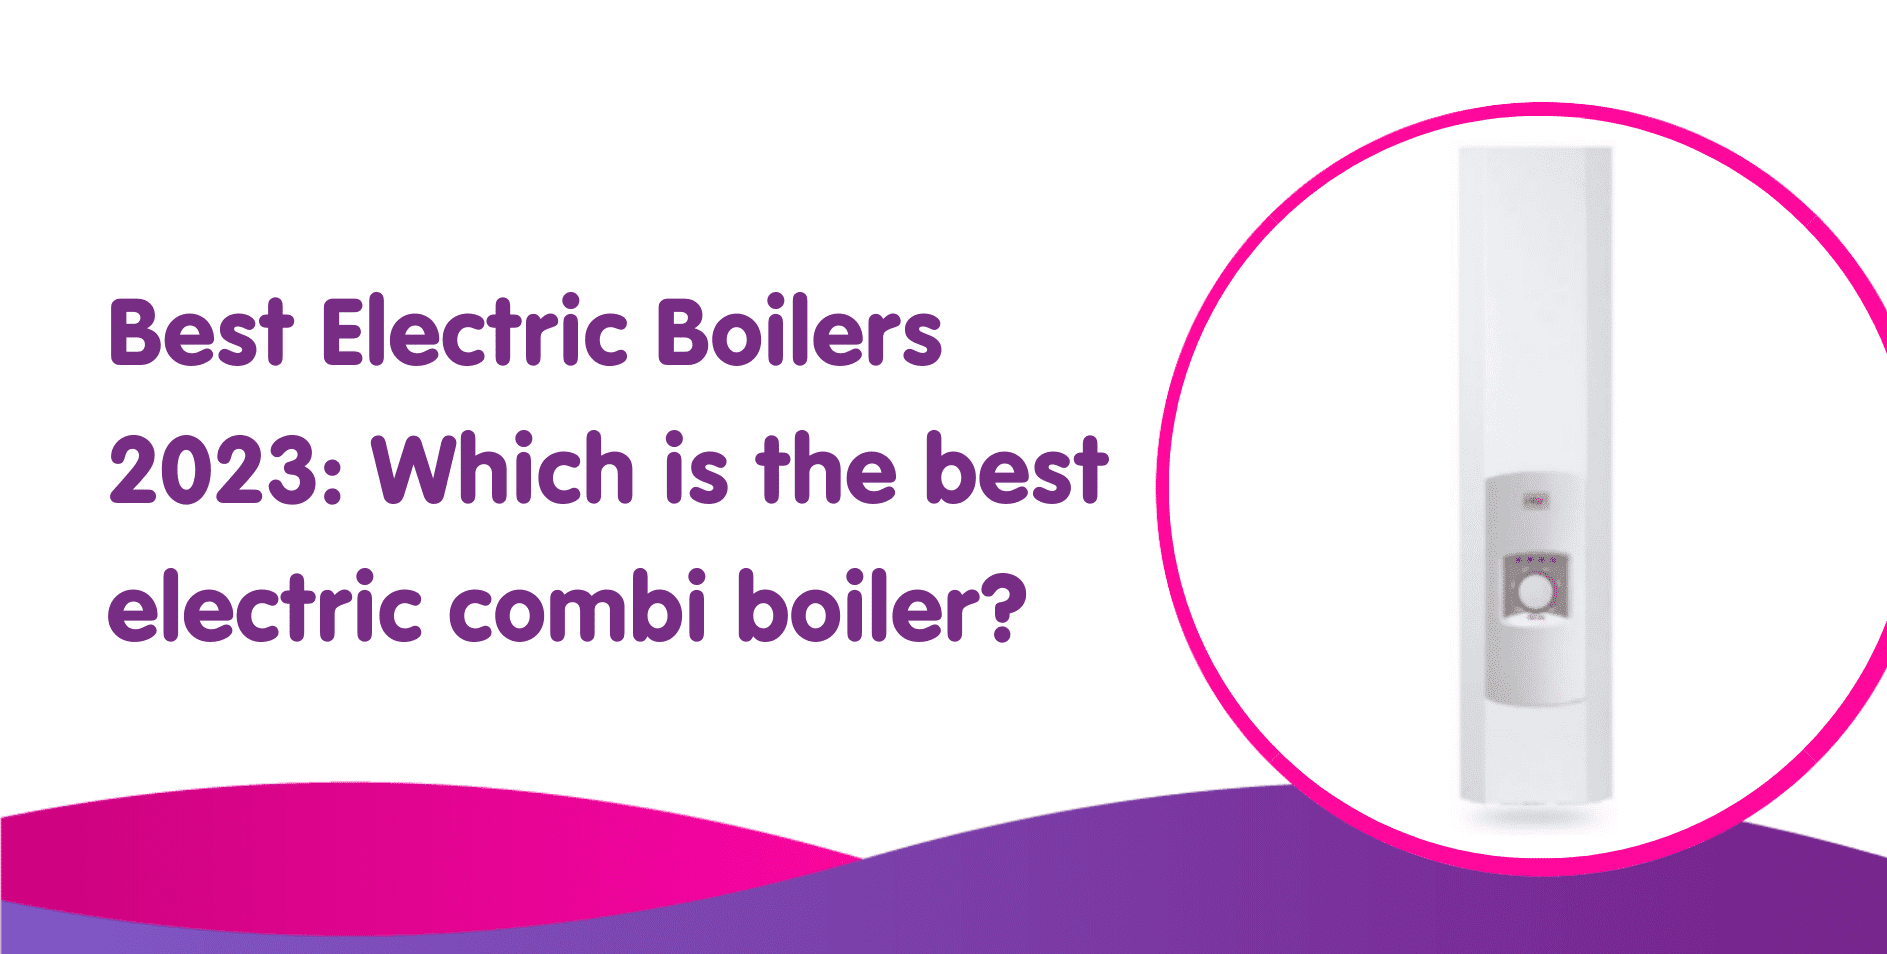 Best Electric Boilers 2023: Which is the best electric combi boiler?